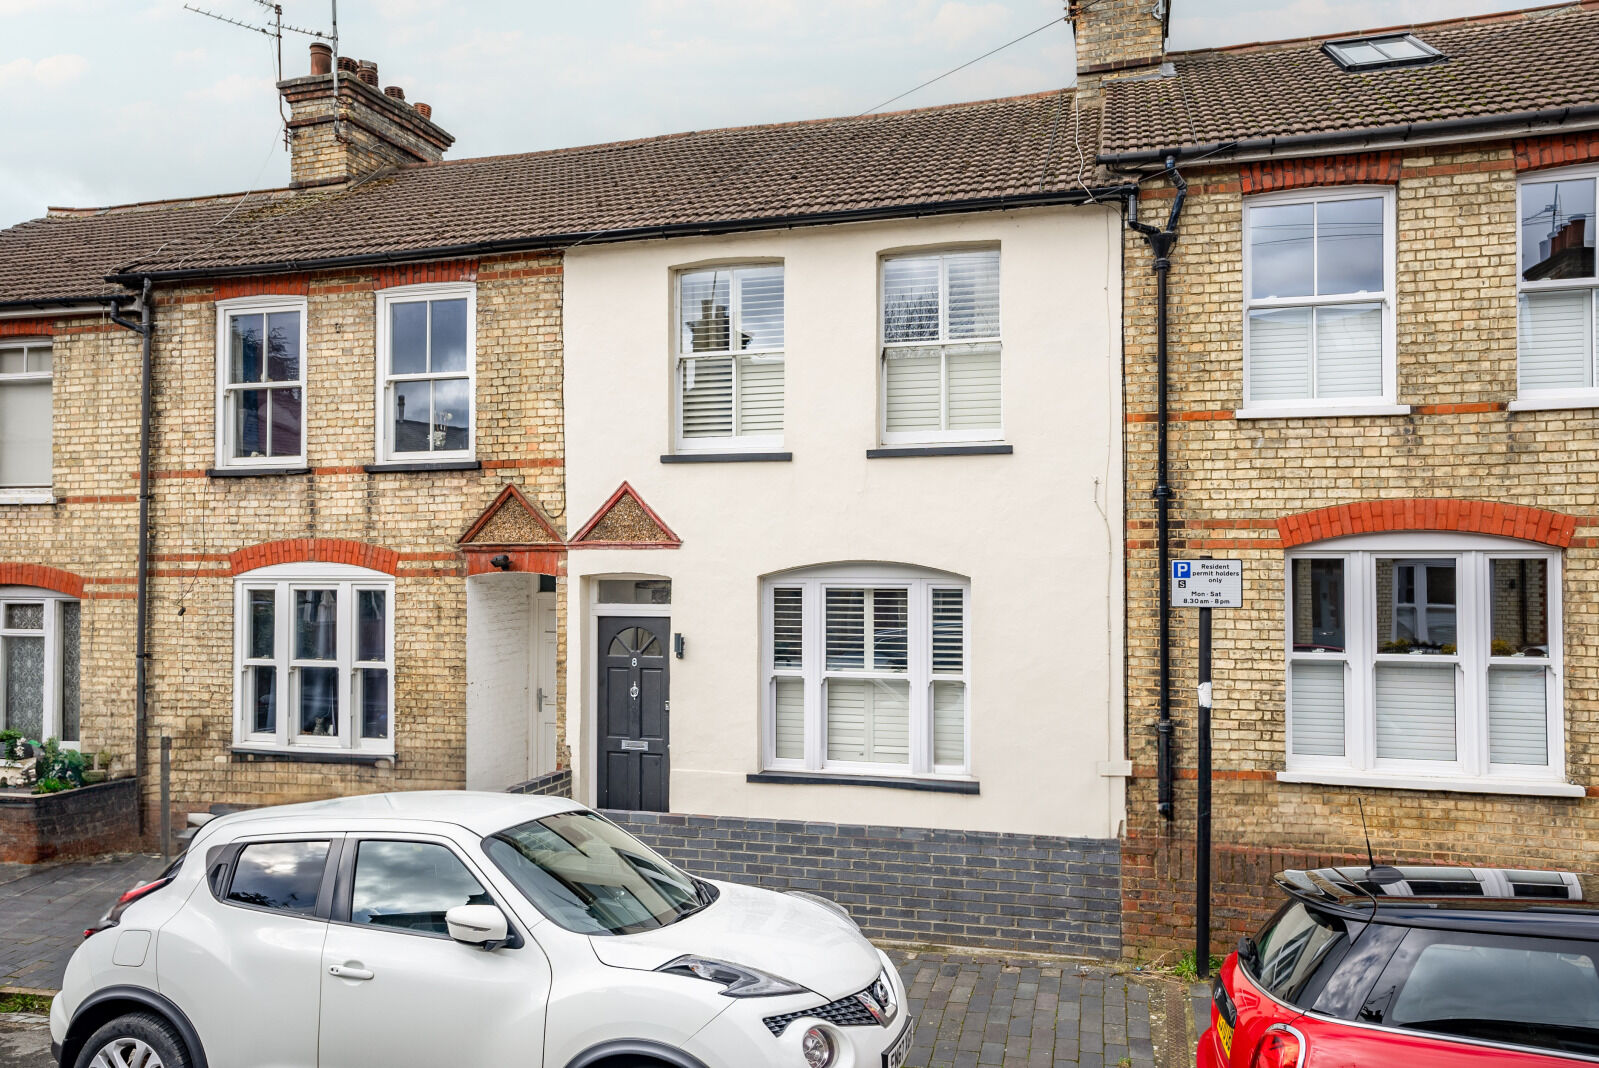 3 bedroom mid terraced house for sale Lower Paxton Road, St. Albans, AL1, main image